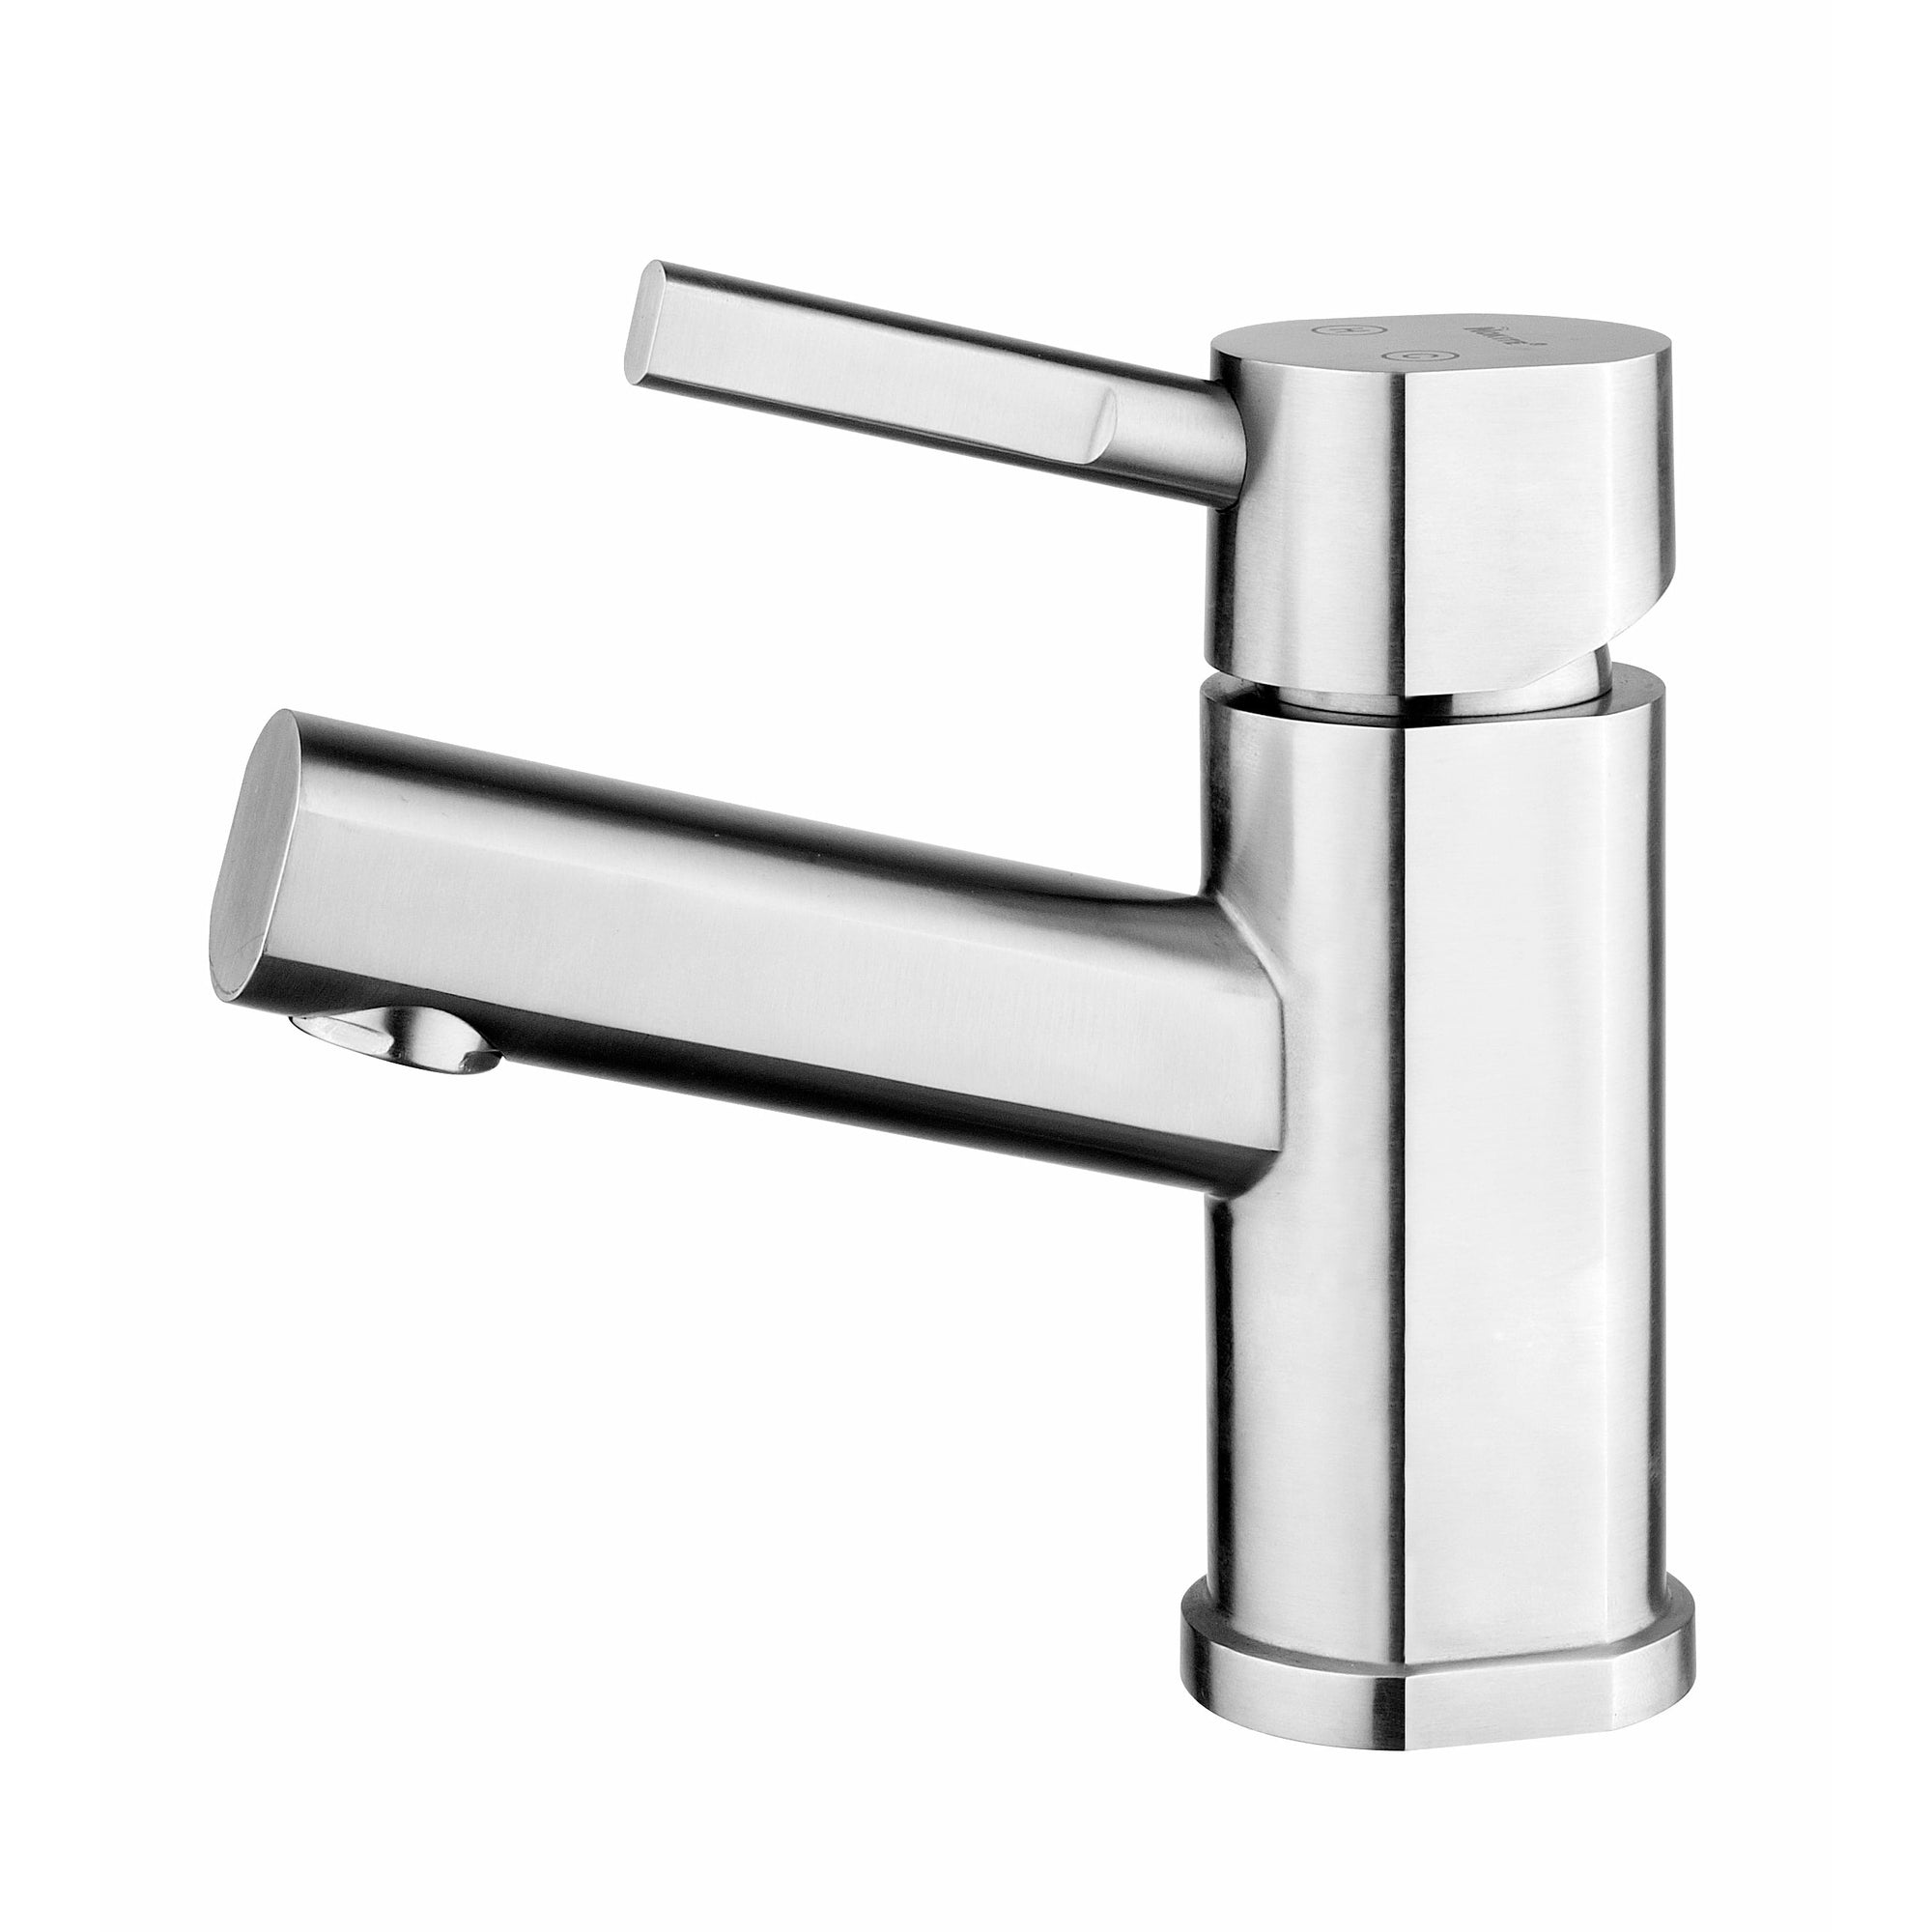 Whitehaus Waterhaus Solid Stainless Steel, Single Hole, Single Lever Lavatory Faucet WHS0311-SB-BSS - Vital Hydrotherapy